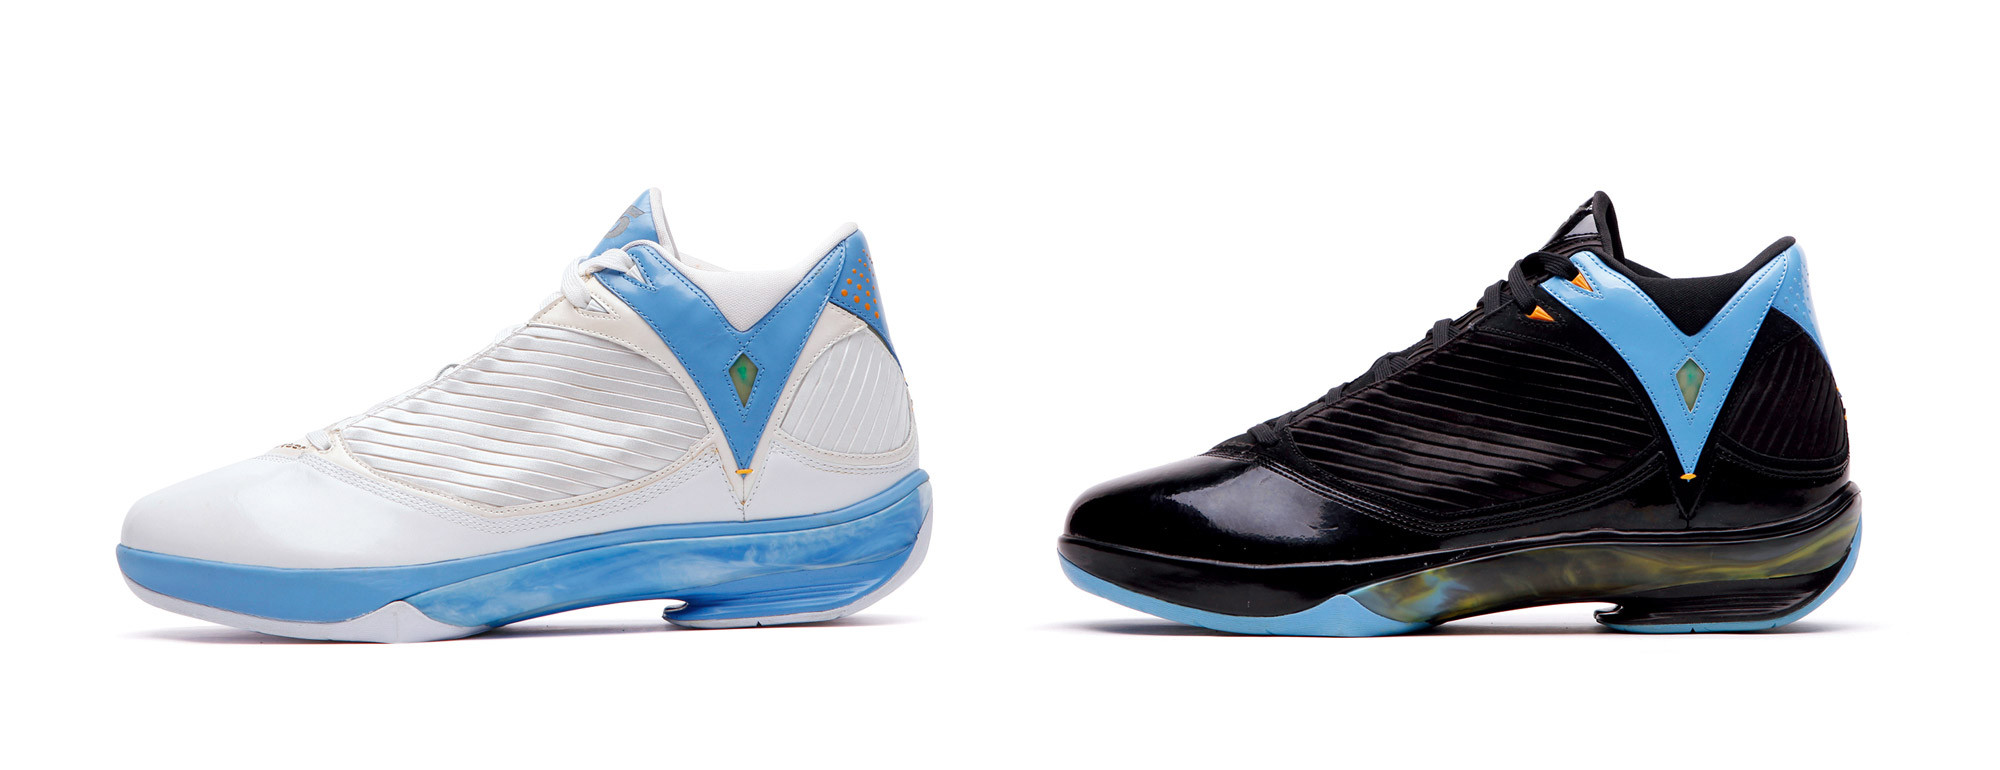 Air Jordan 2009“Carmelo Anthony” PE Collection